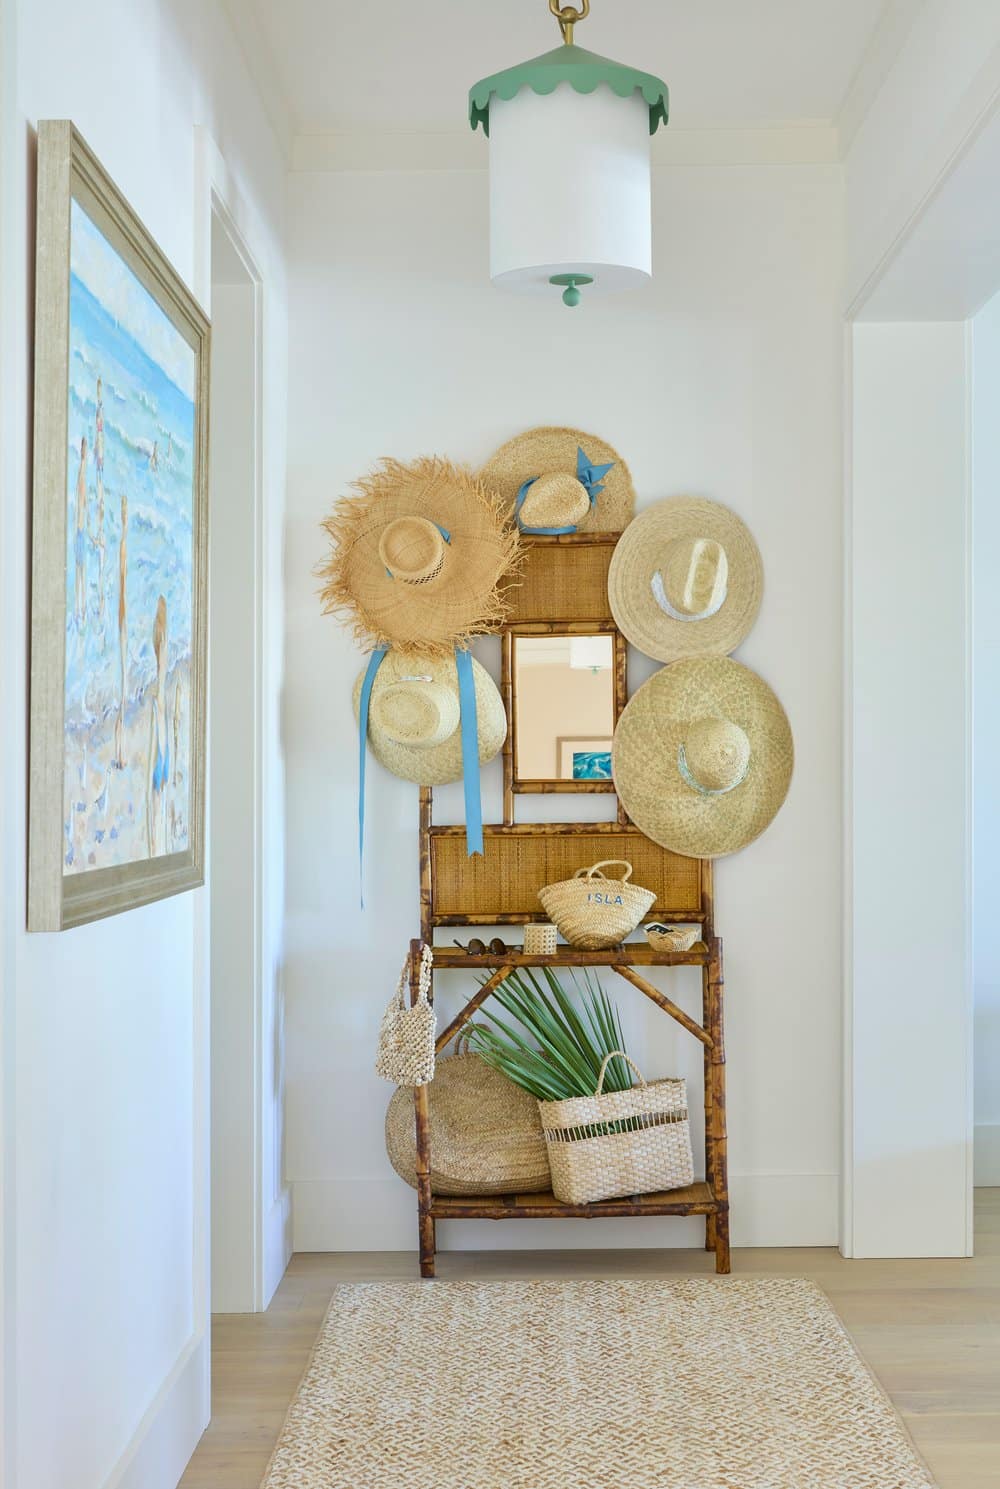 Brantley PhotographyWe've just entered fall, but with this beautiful, warm weath I can't stop daydreaming about summer. That’s the enchanting essence that permeates every corner of this captivating West Palm Beach house designed by Kara Miller Interiors .